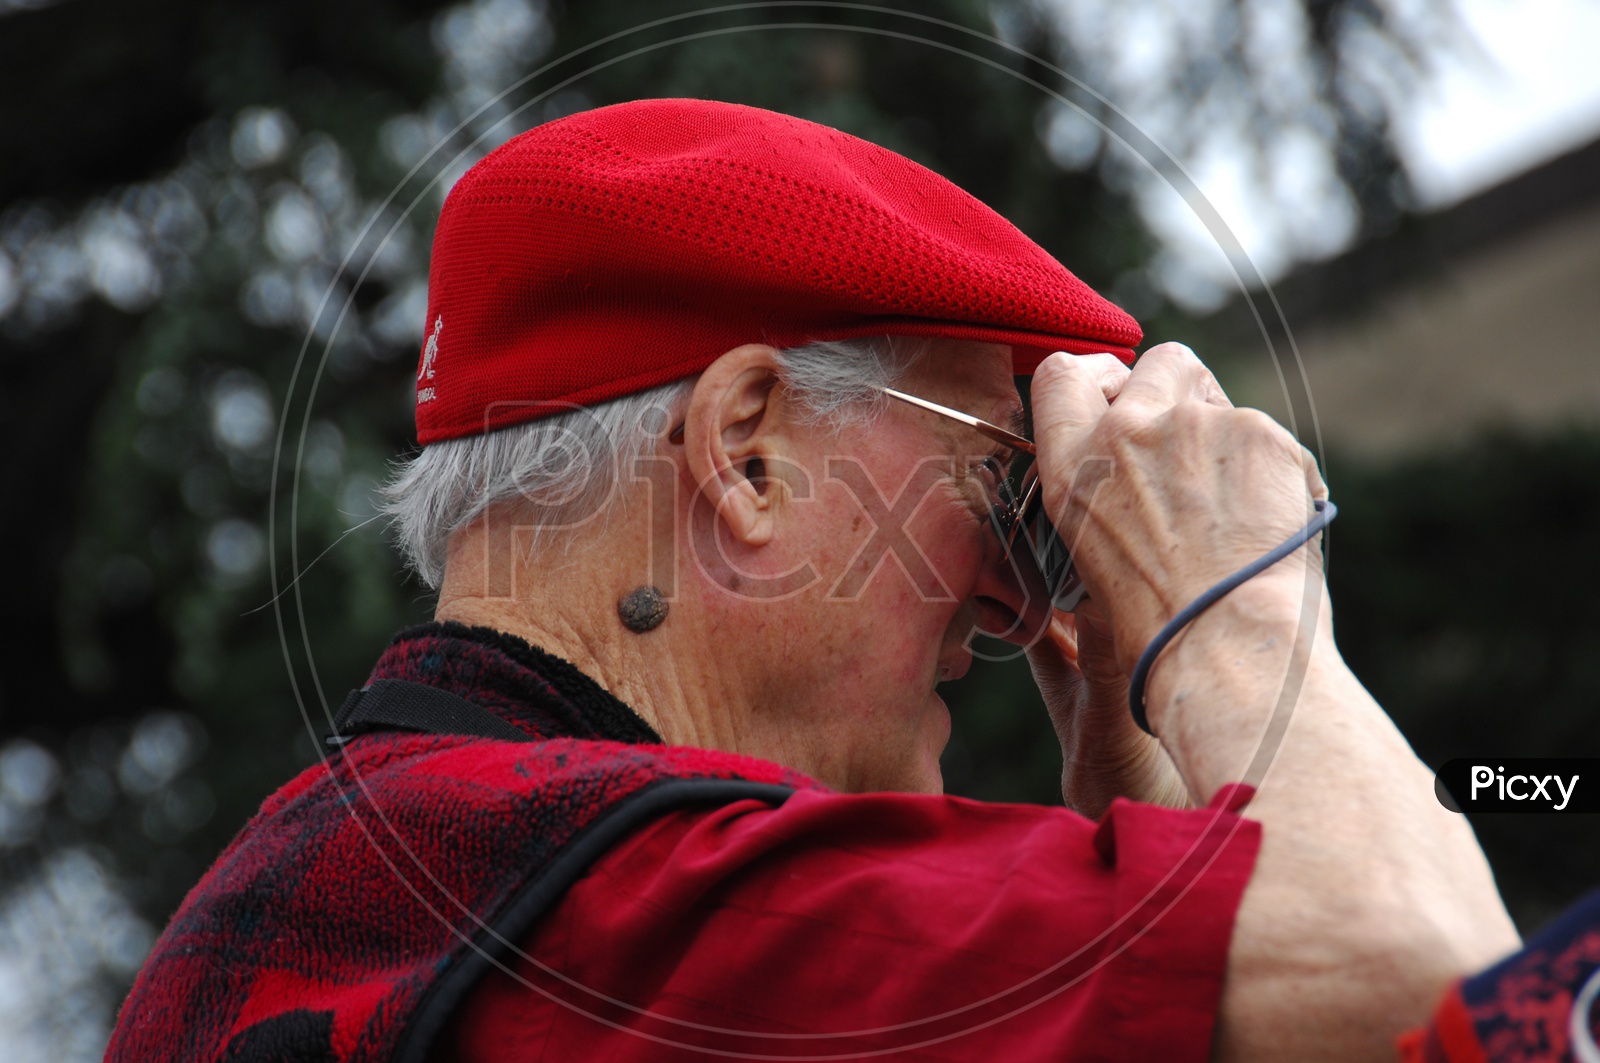 An old man wearing a red cap clicking a picture